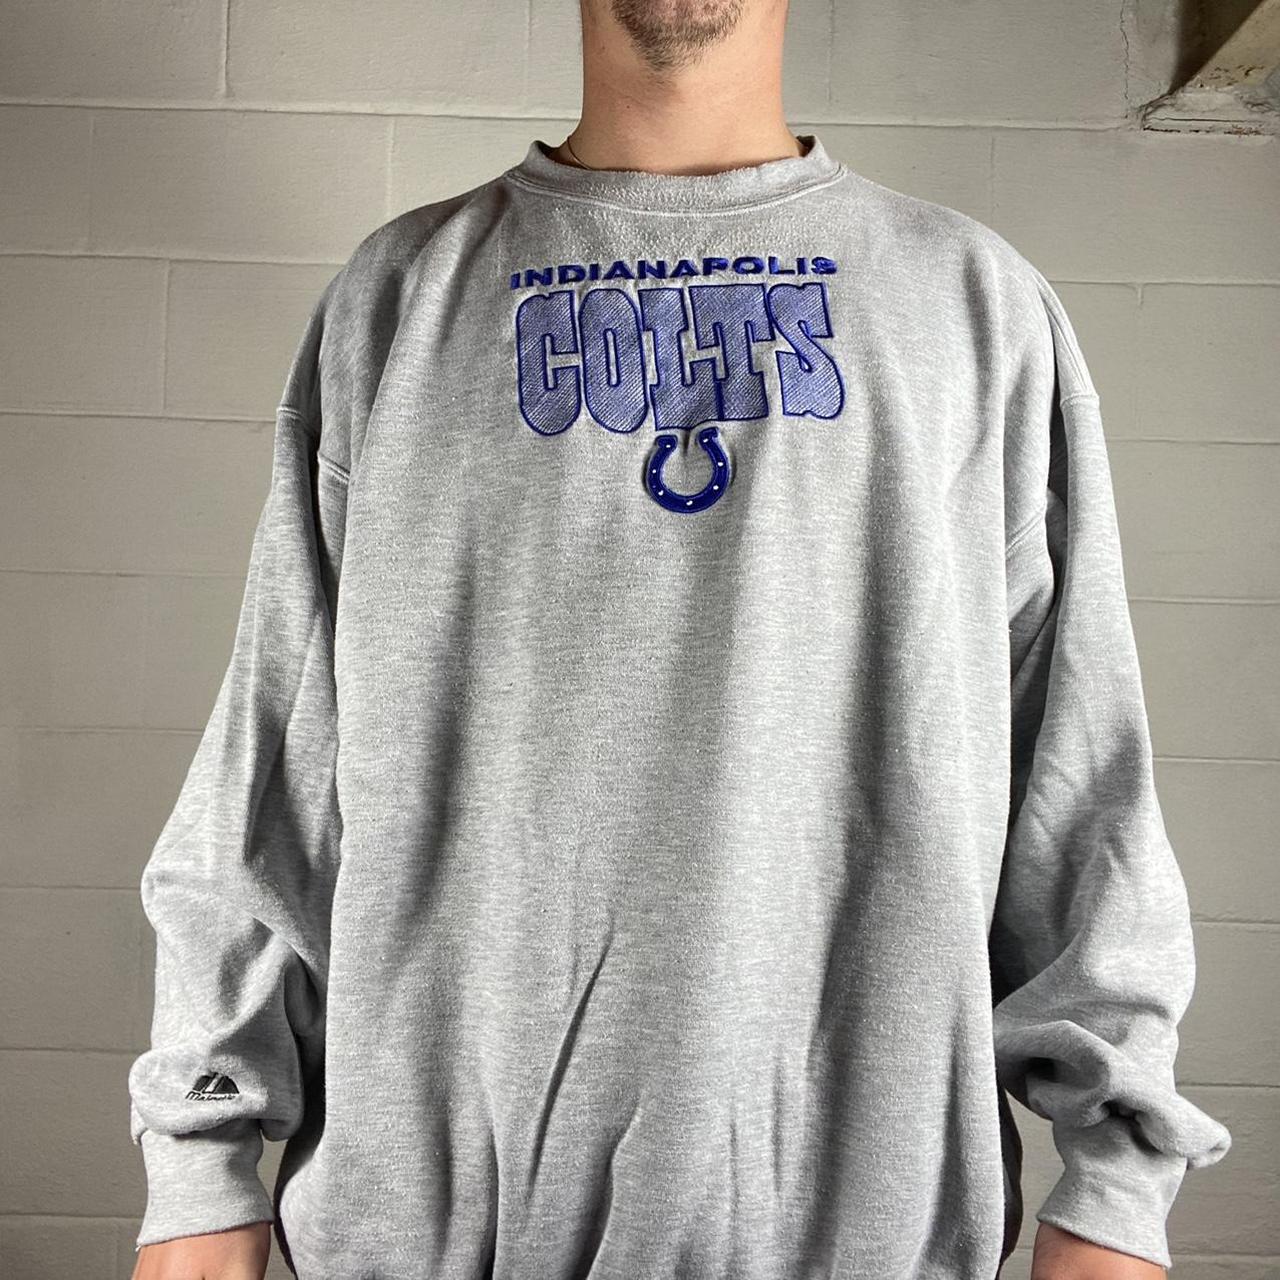 Product Image 1 - Vintage 90s grey INDIANAPOLIS COLTS